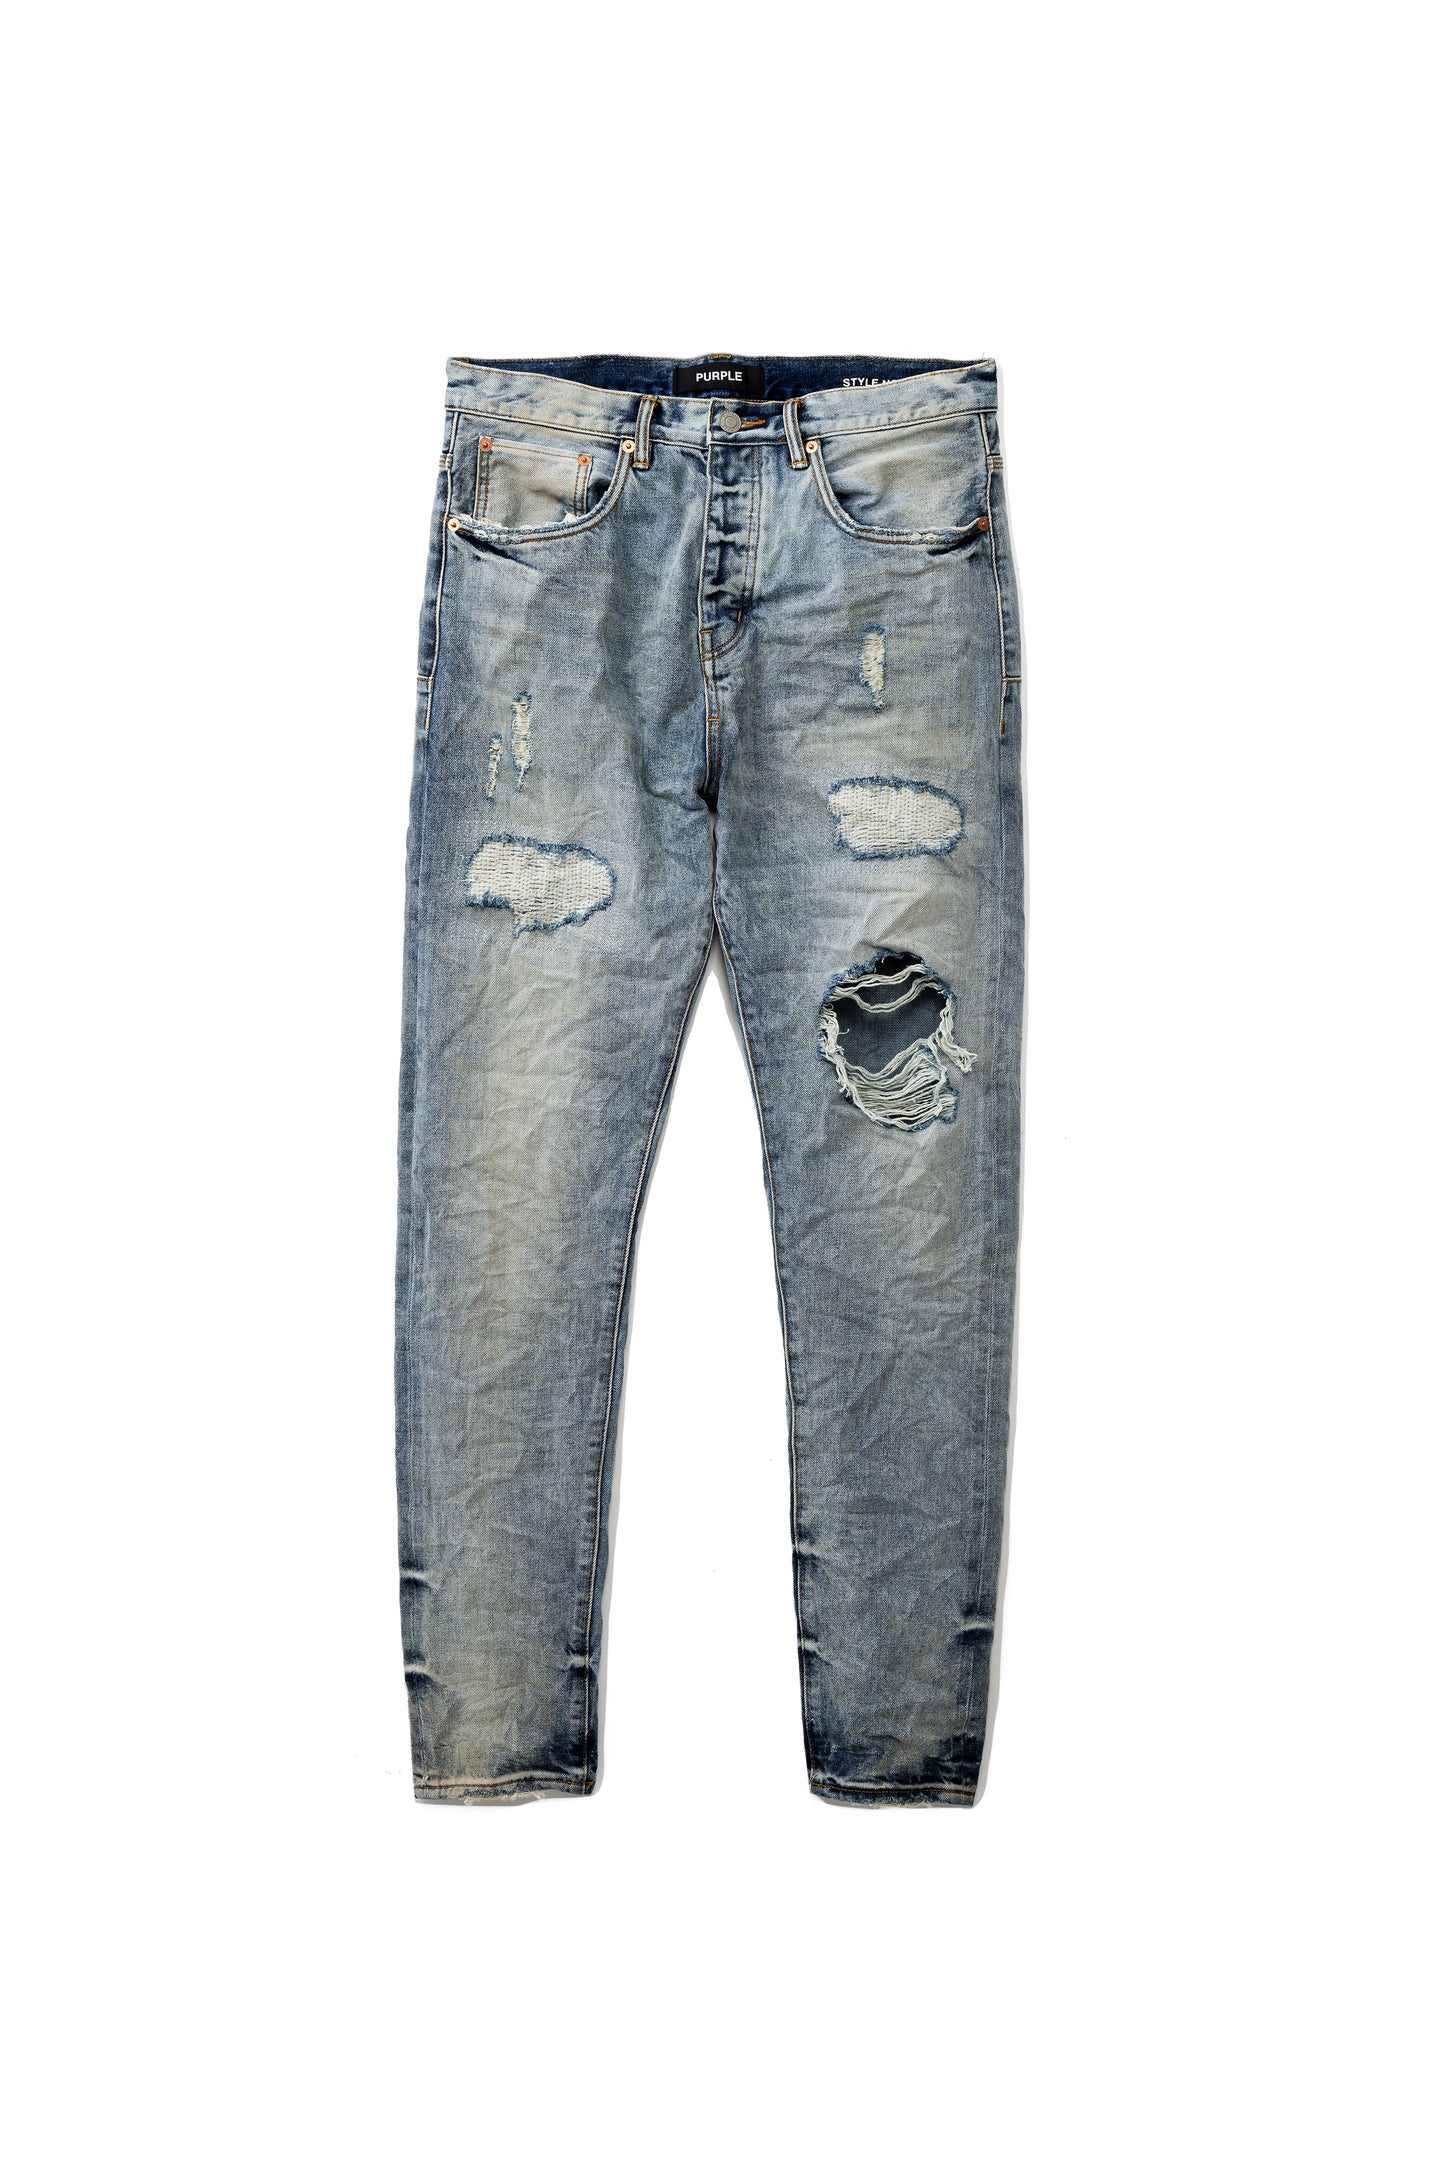 P003 LONG RISE RELAXED JEAN - Vintage Wash Repair